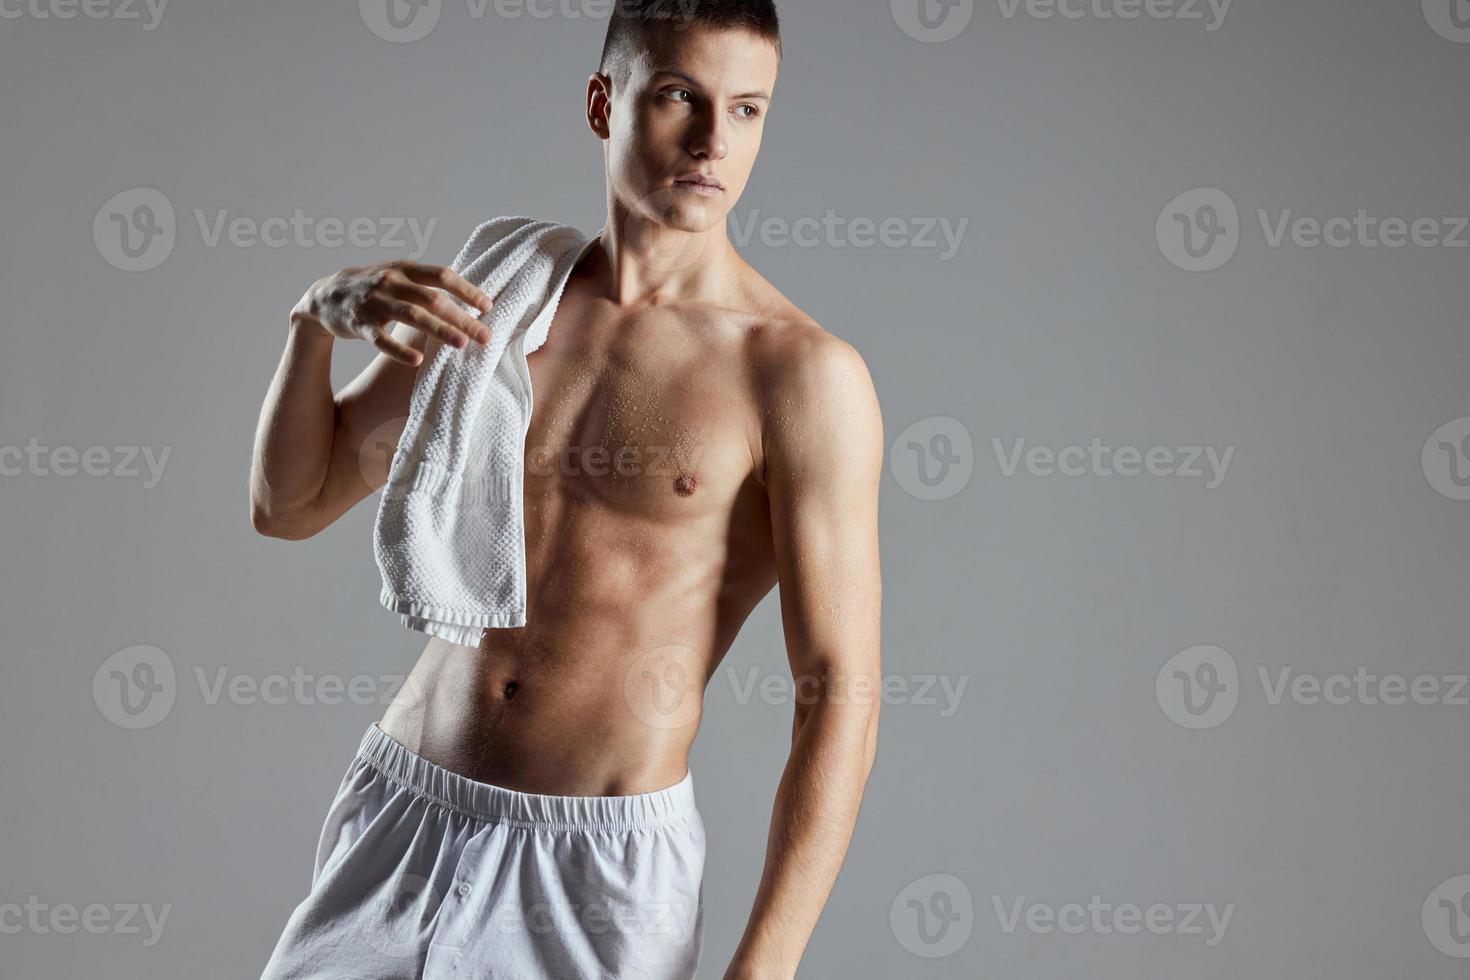 Athletic Guy Finish With Muscular Body Towel On Shoulders Cropped View Studio photo